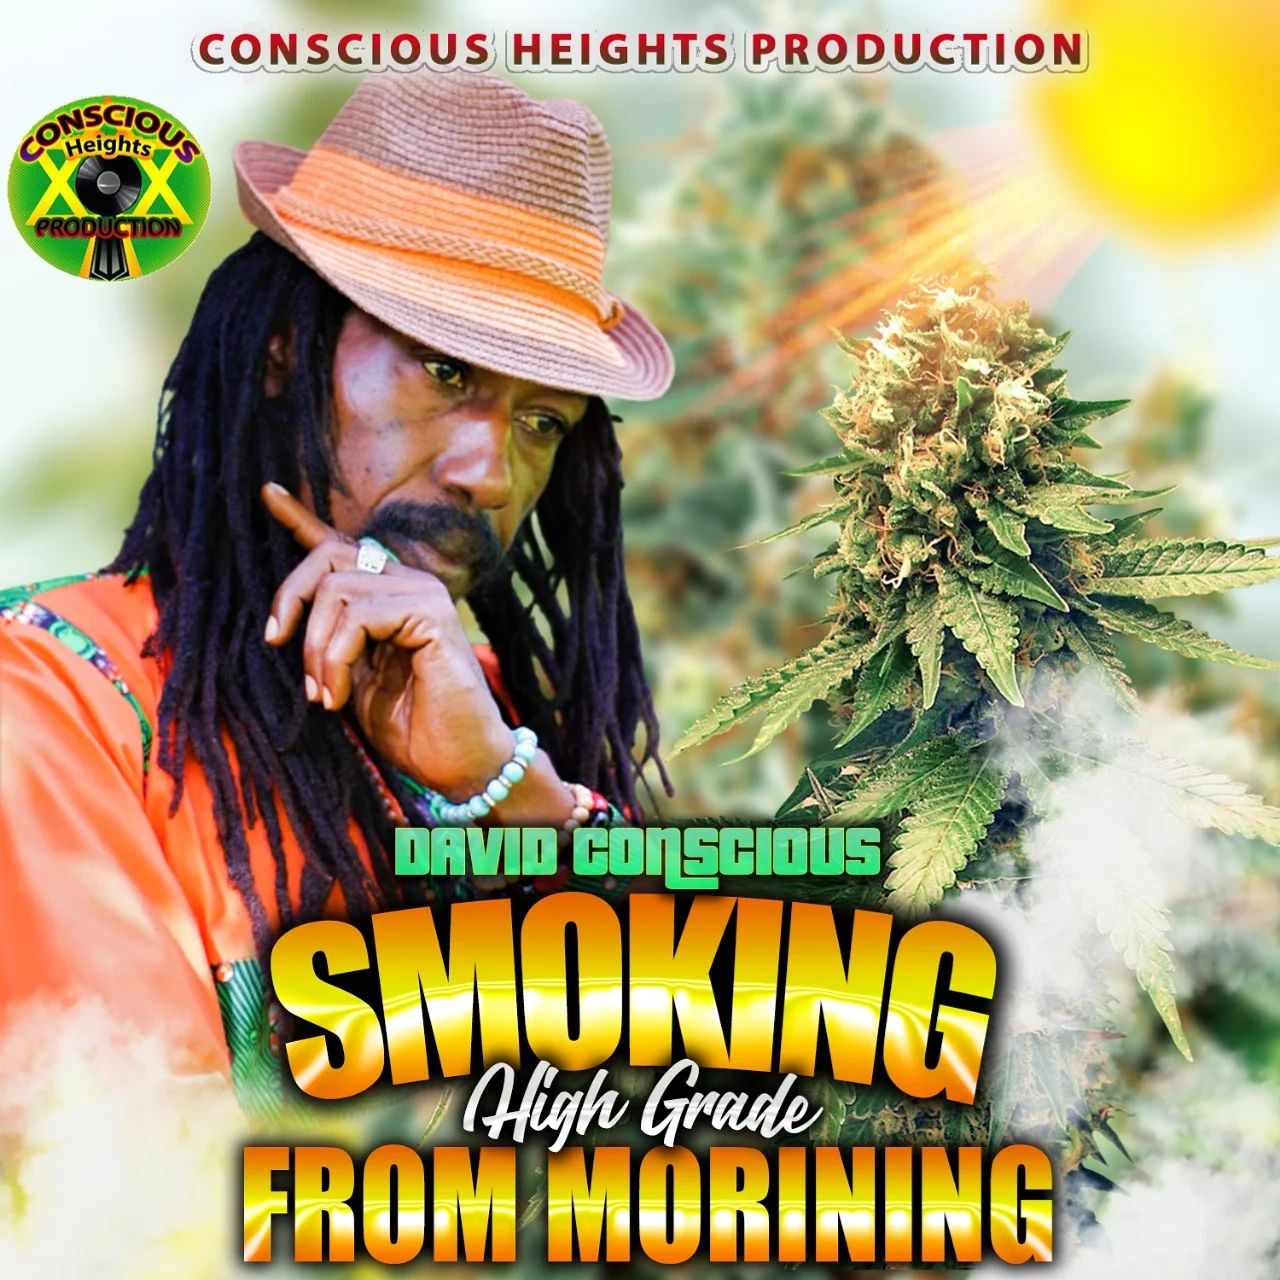 Smoking From Morning  (available December 24, 2021
Singer/Songwriter: David Conscious
Record Label: 